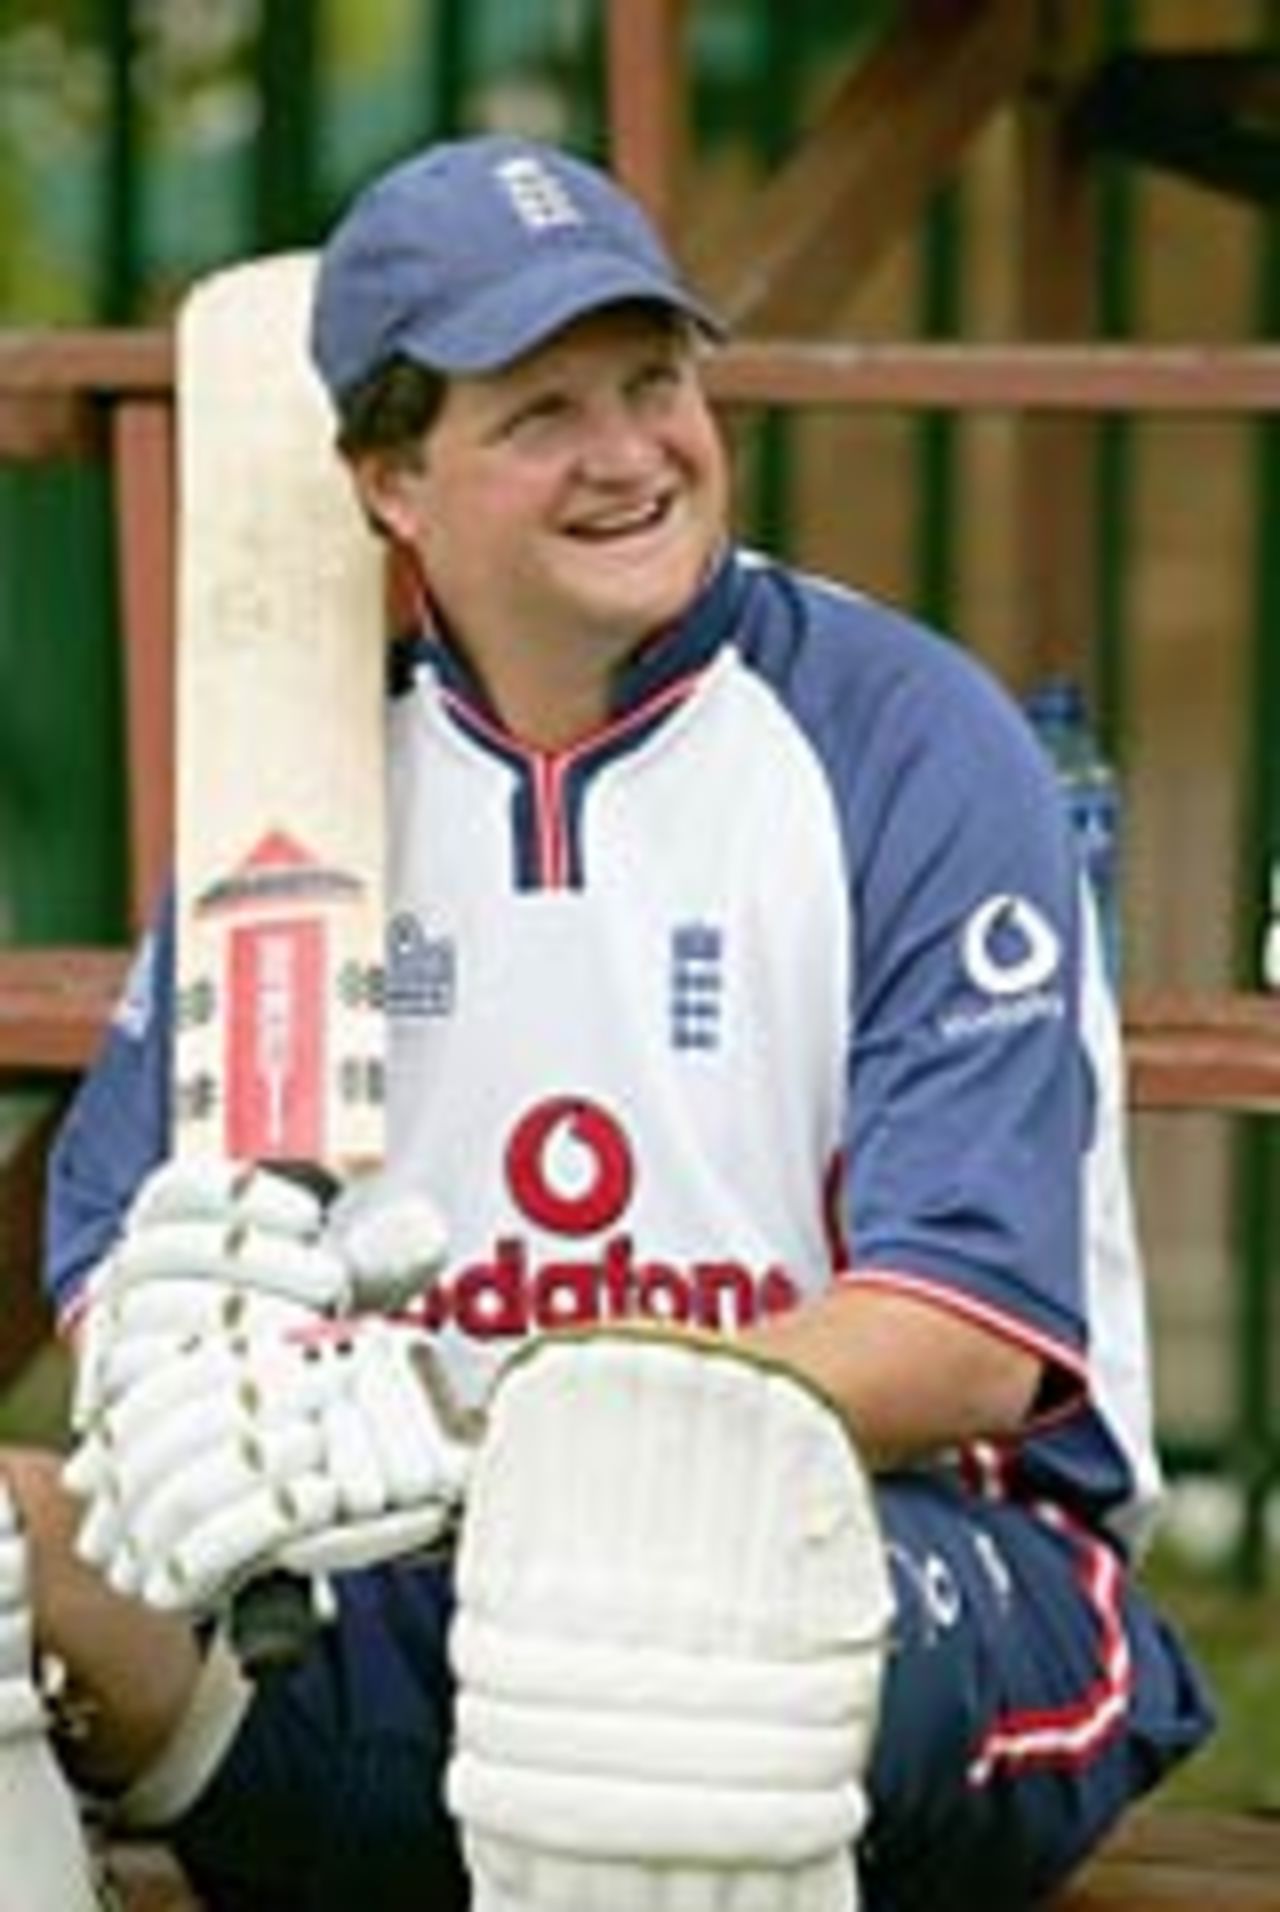 Robert Key chuckles before his turn to bat in the nets at the Wanderers, January 11, 2005